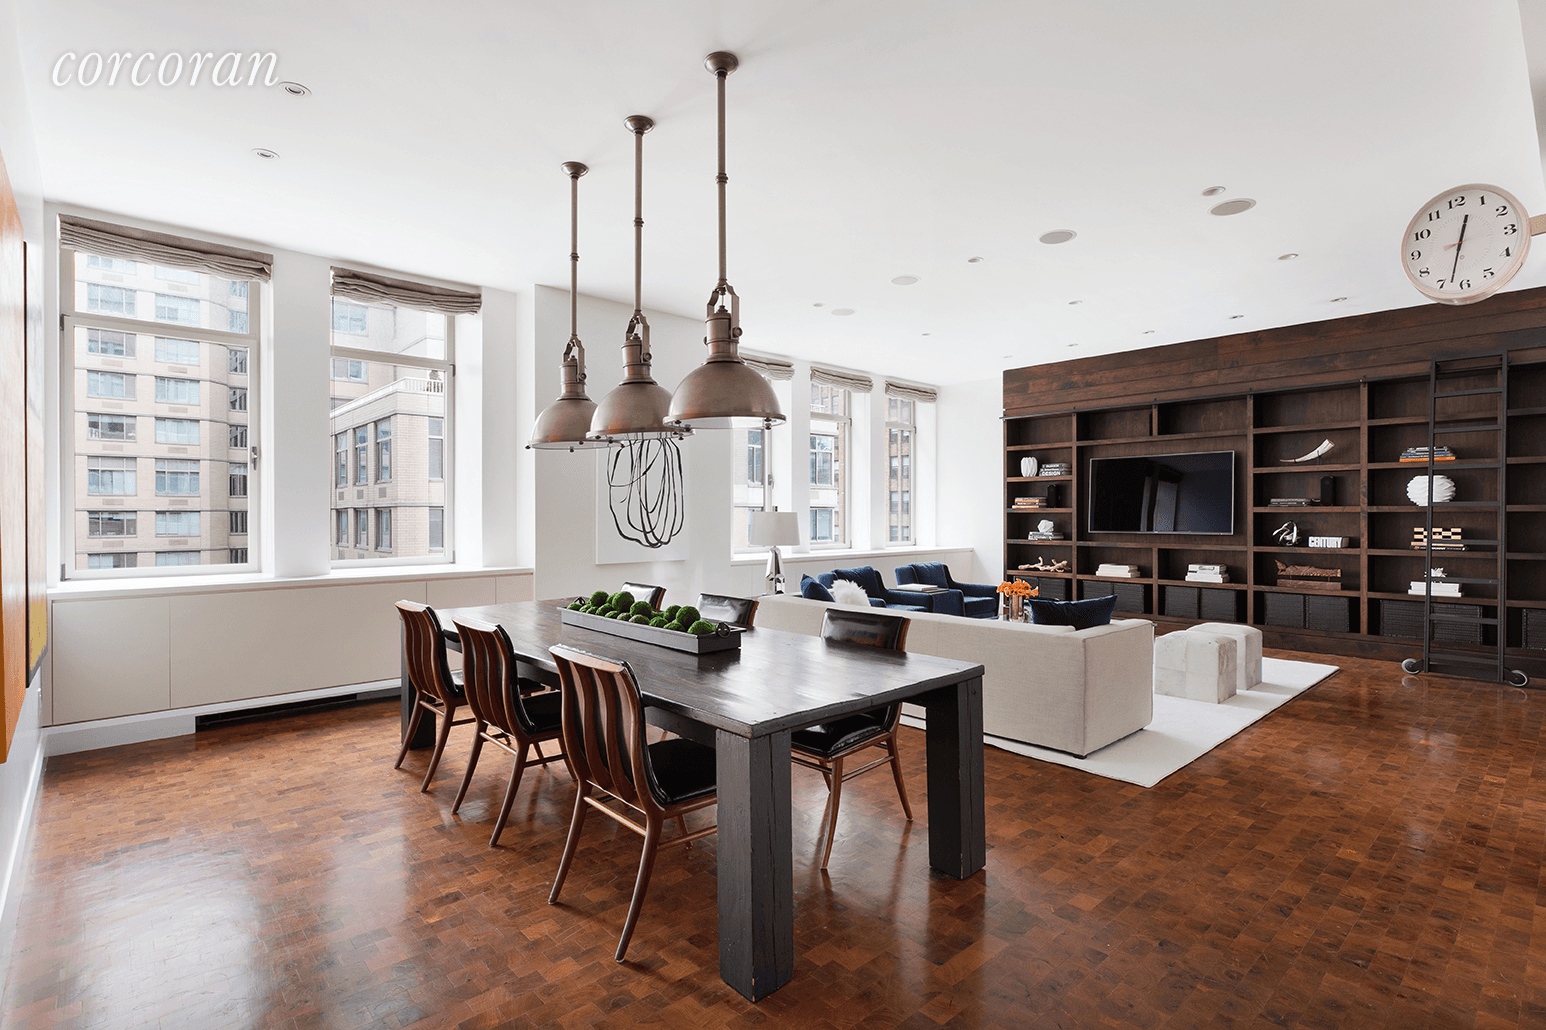 A rare find, this duplex residence affords easy living with tons of space, abundant storage, and the full amenity package that The Chelsea Mercantile is known for.